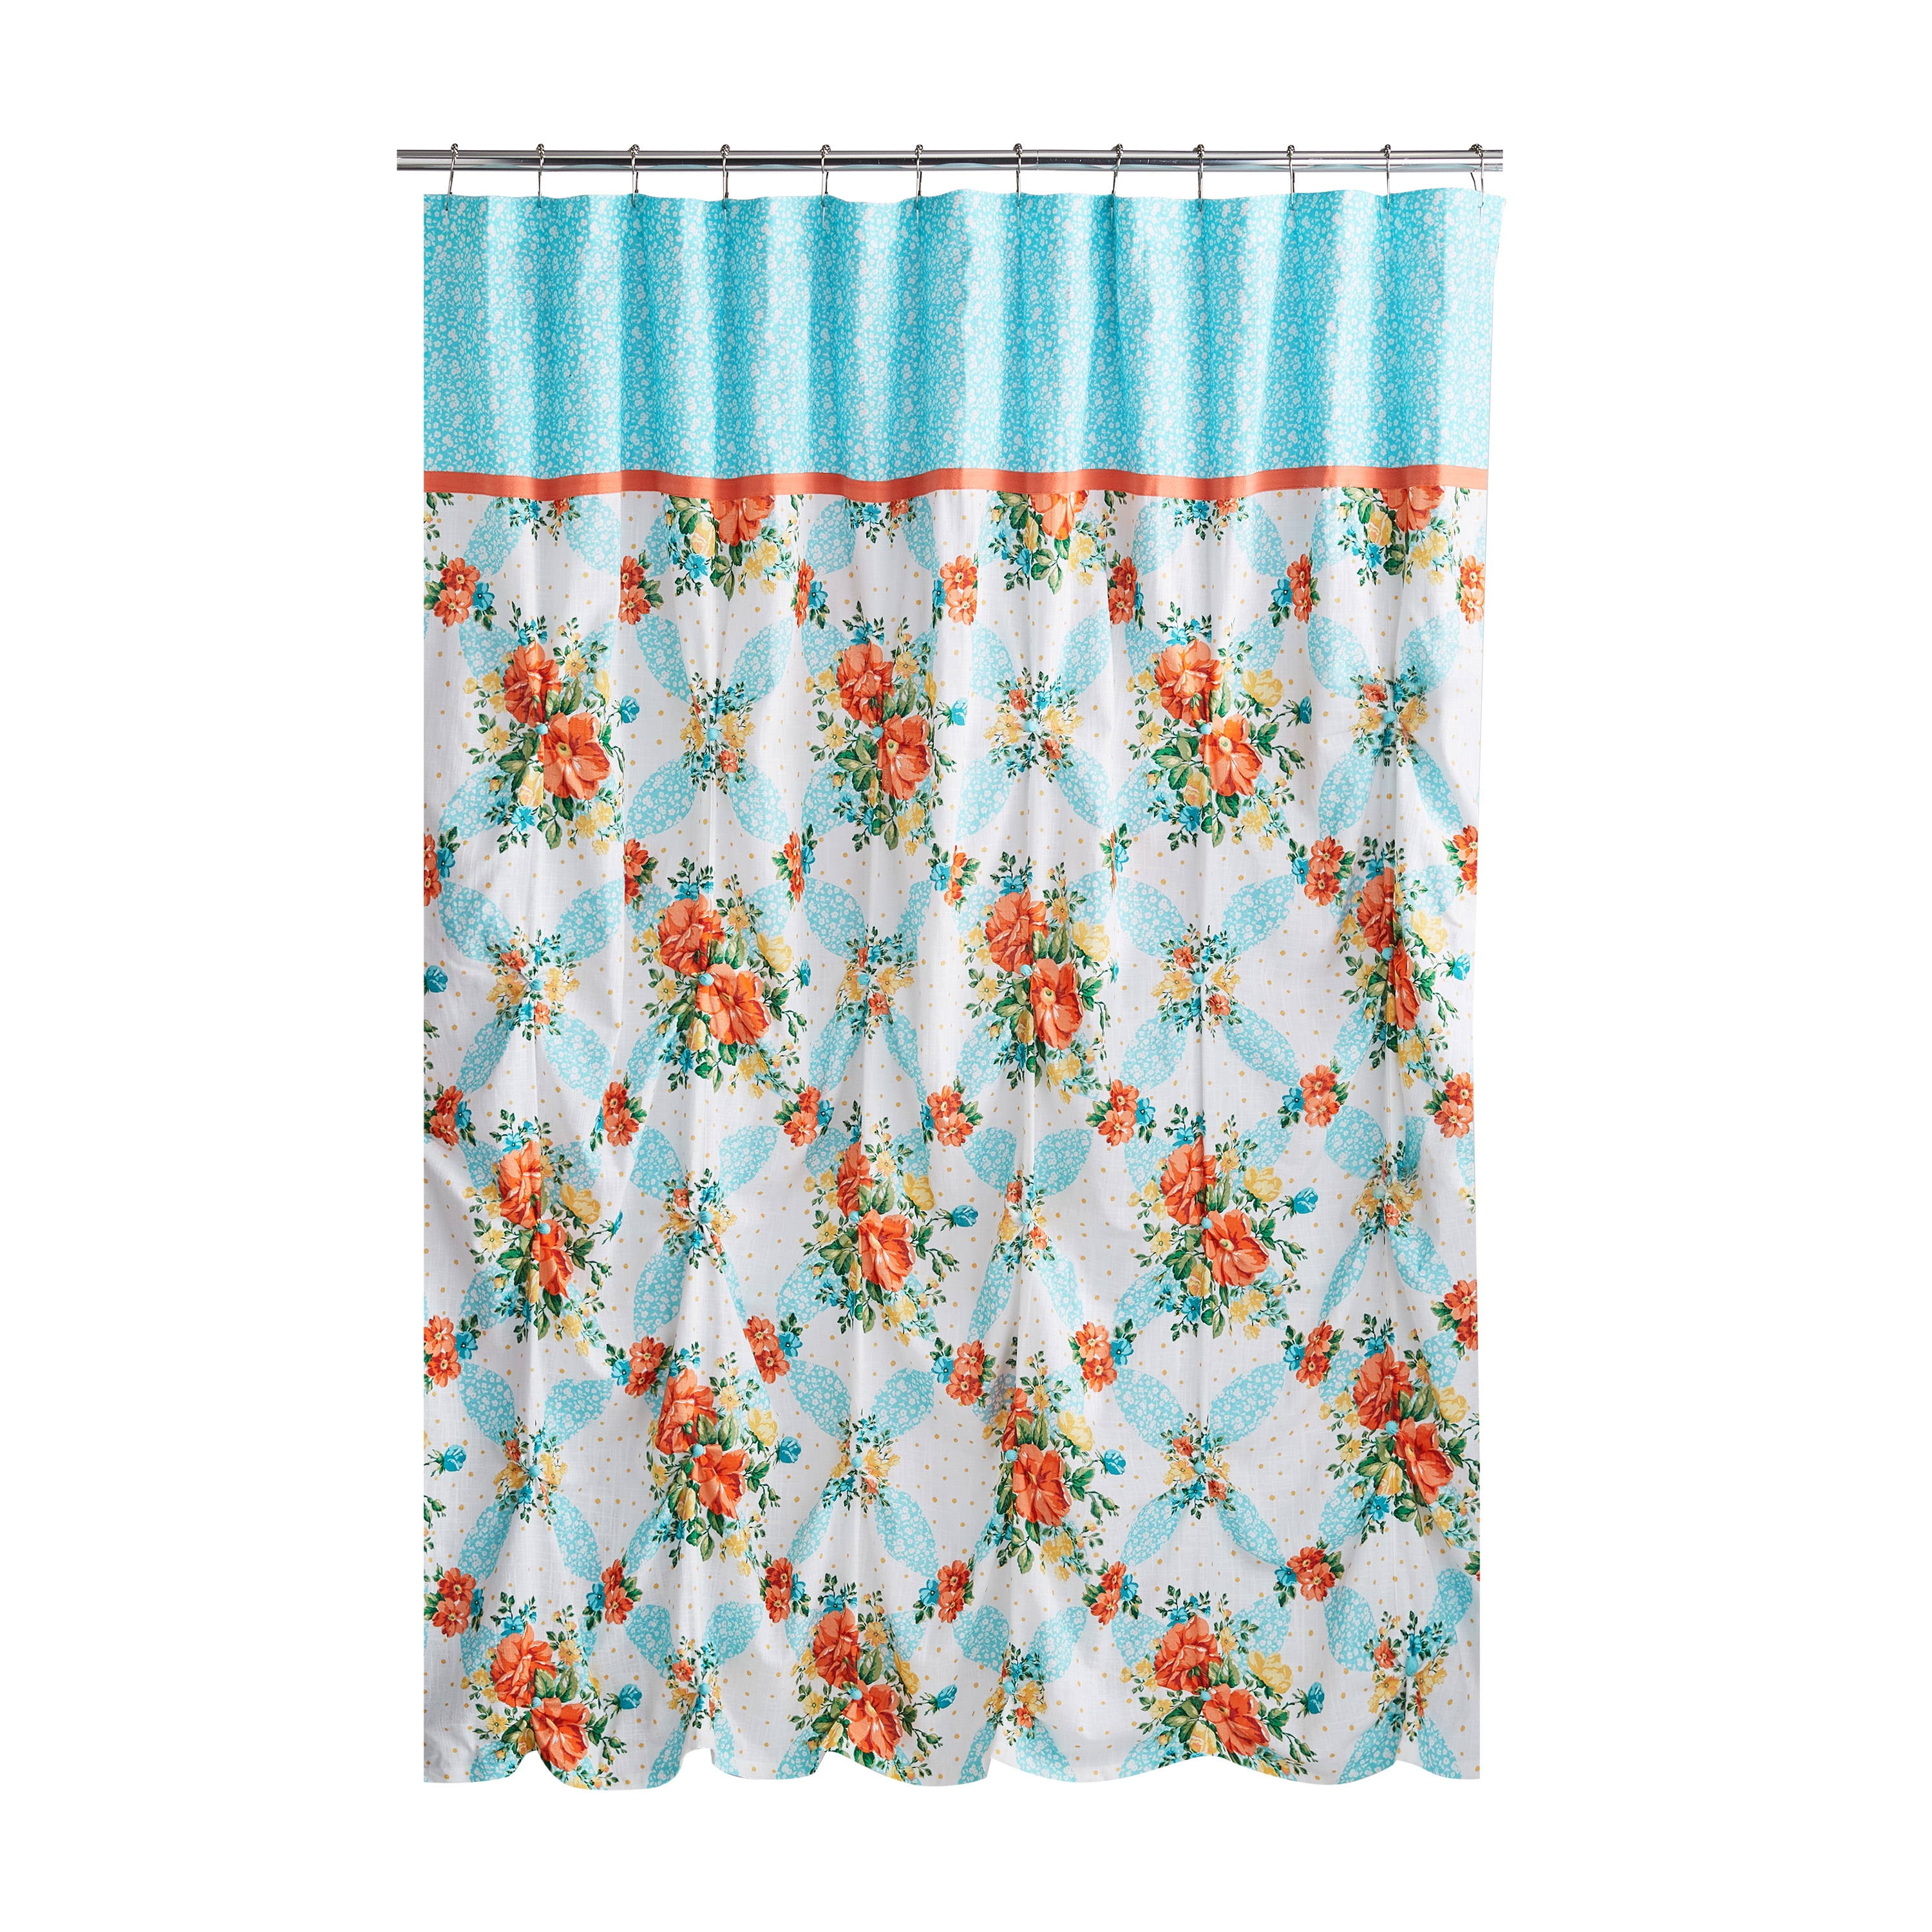 The Pioneer Woman Vintage Floral Cotton Shower Curtain, 72"